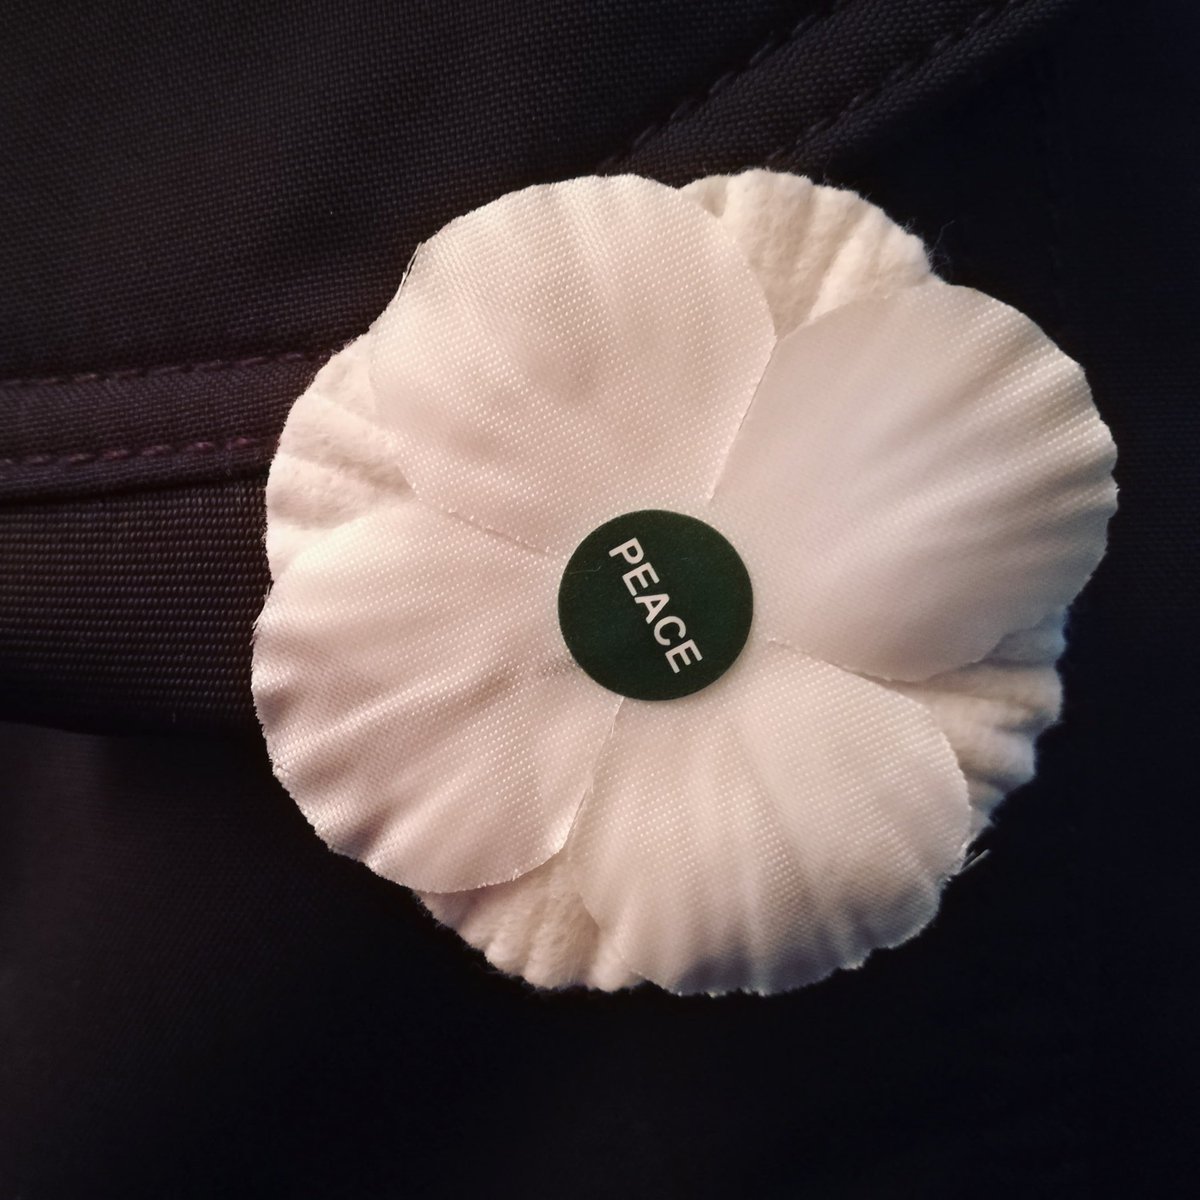 A poppy for peace
A poppy for all victims of all wars

#WhitePoppies
@PPUtoday